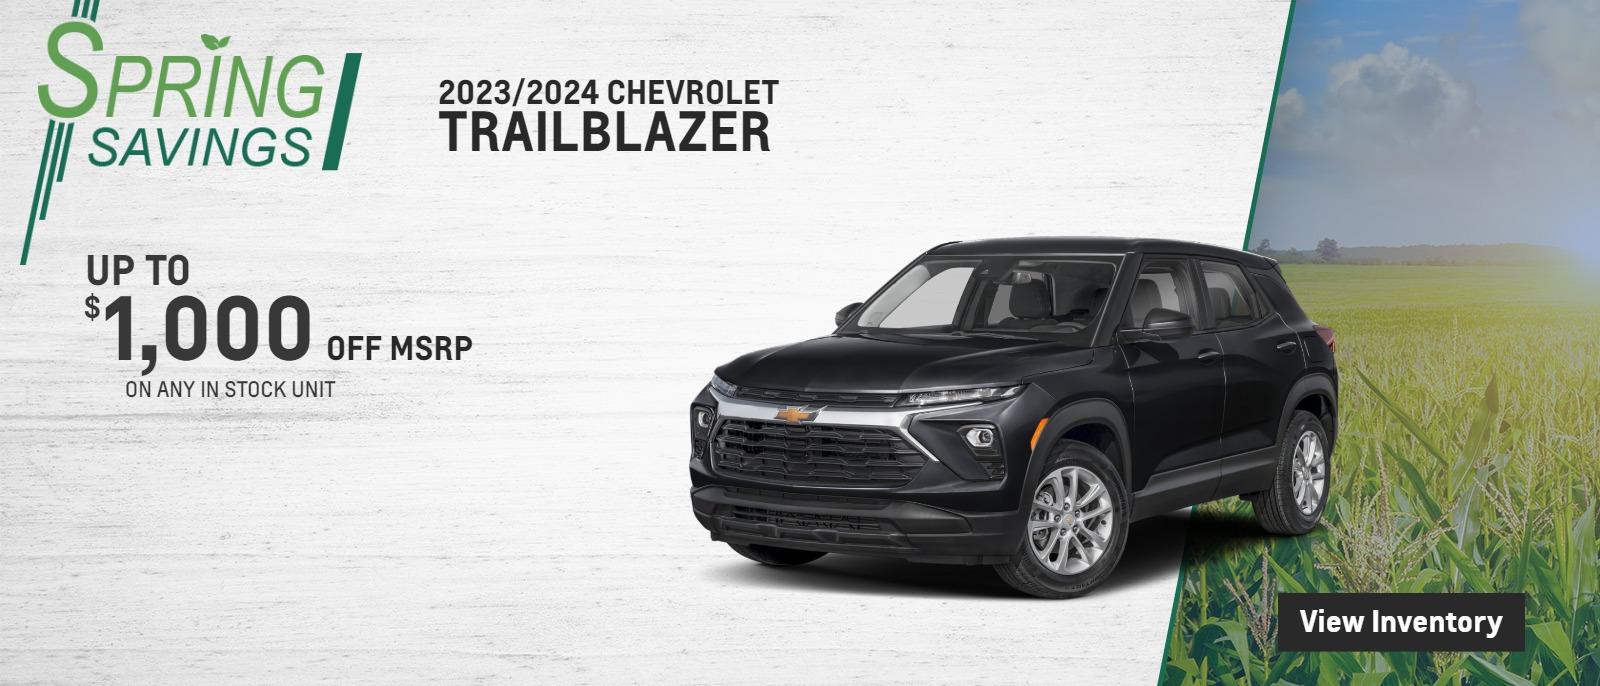 2023/2024 TRAILBLAZER
$1000 OFF MSRP ON ANY IN STOCK UNIT